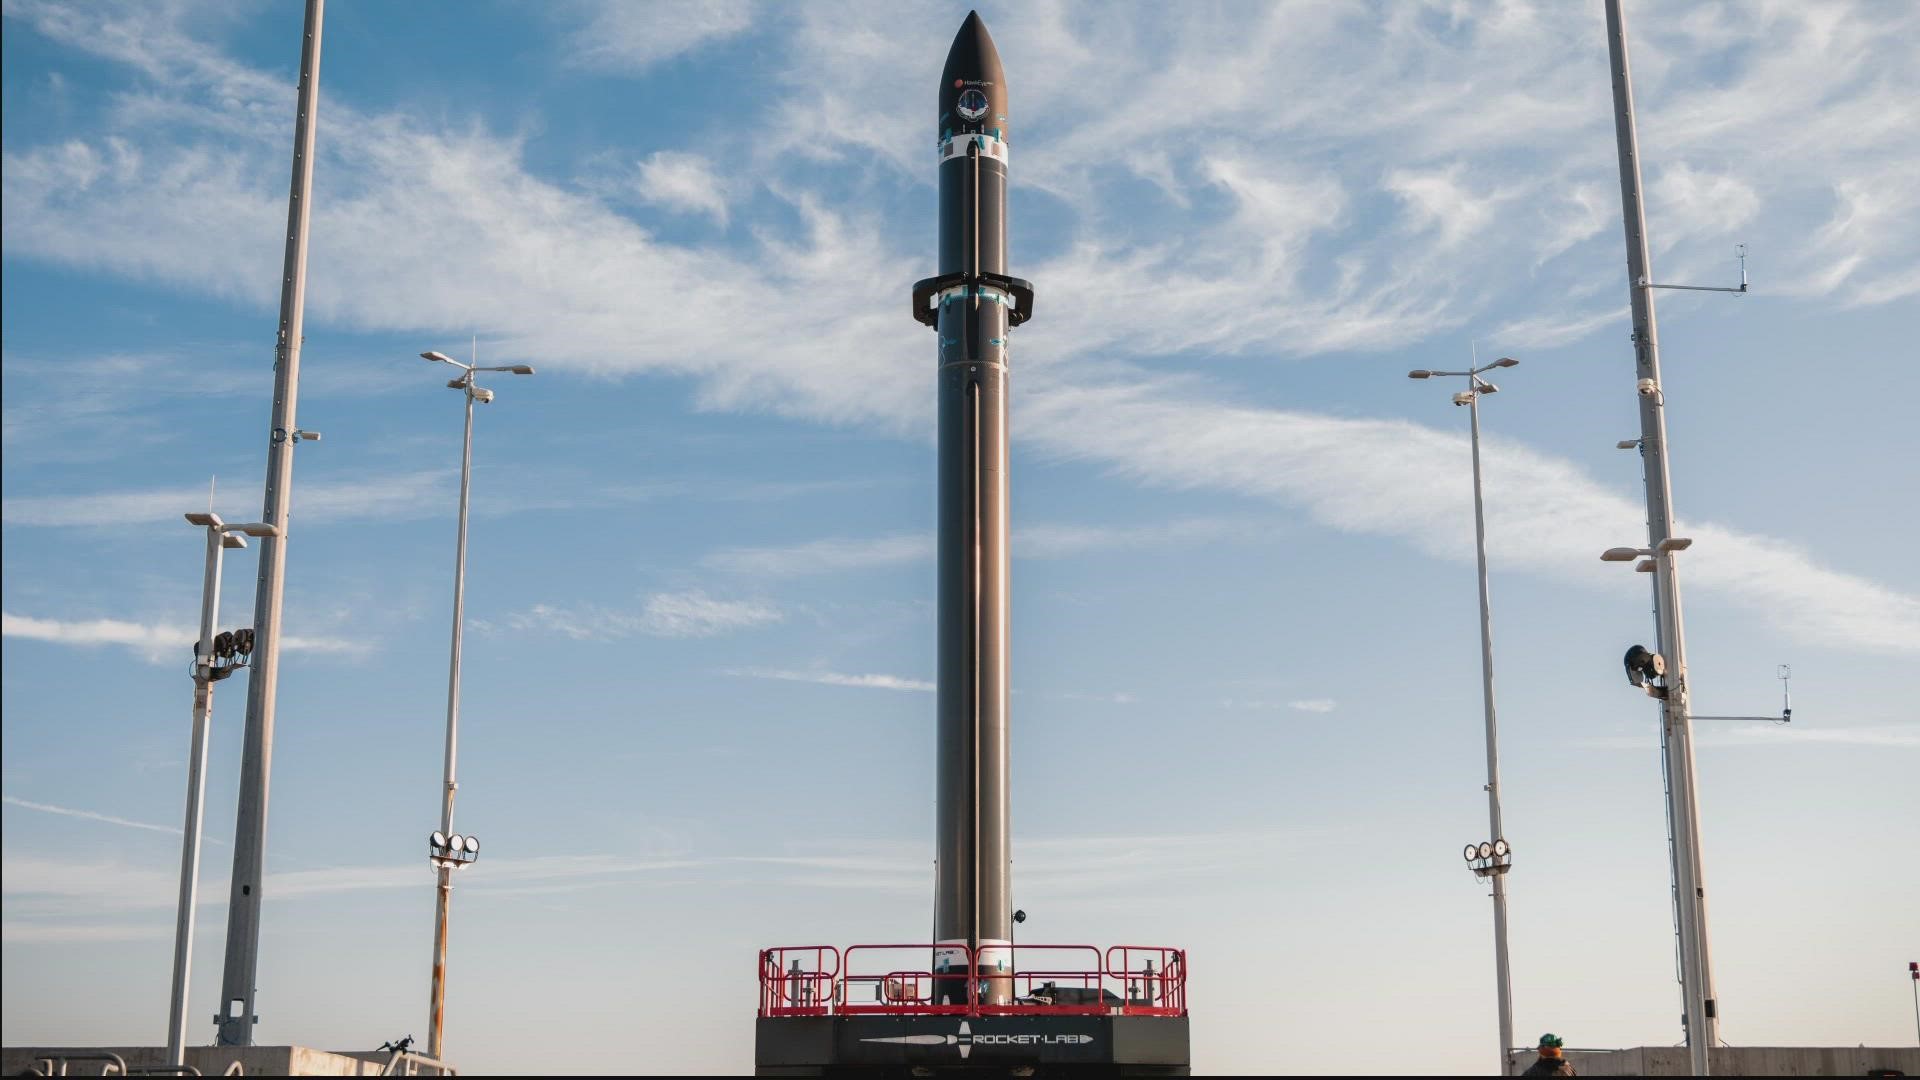 After weather scrubbed an early launch attempt, Rocket Lab USA is expected to launch its first Electron rocket from NASA's Wallops Flight Facility in Virginia.